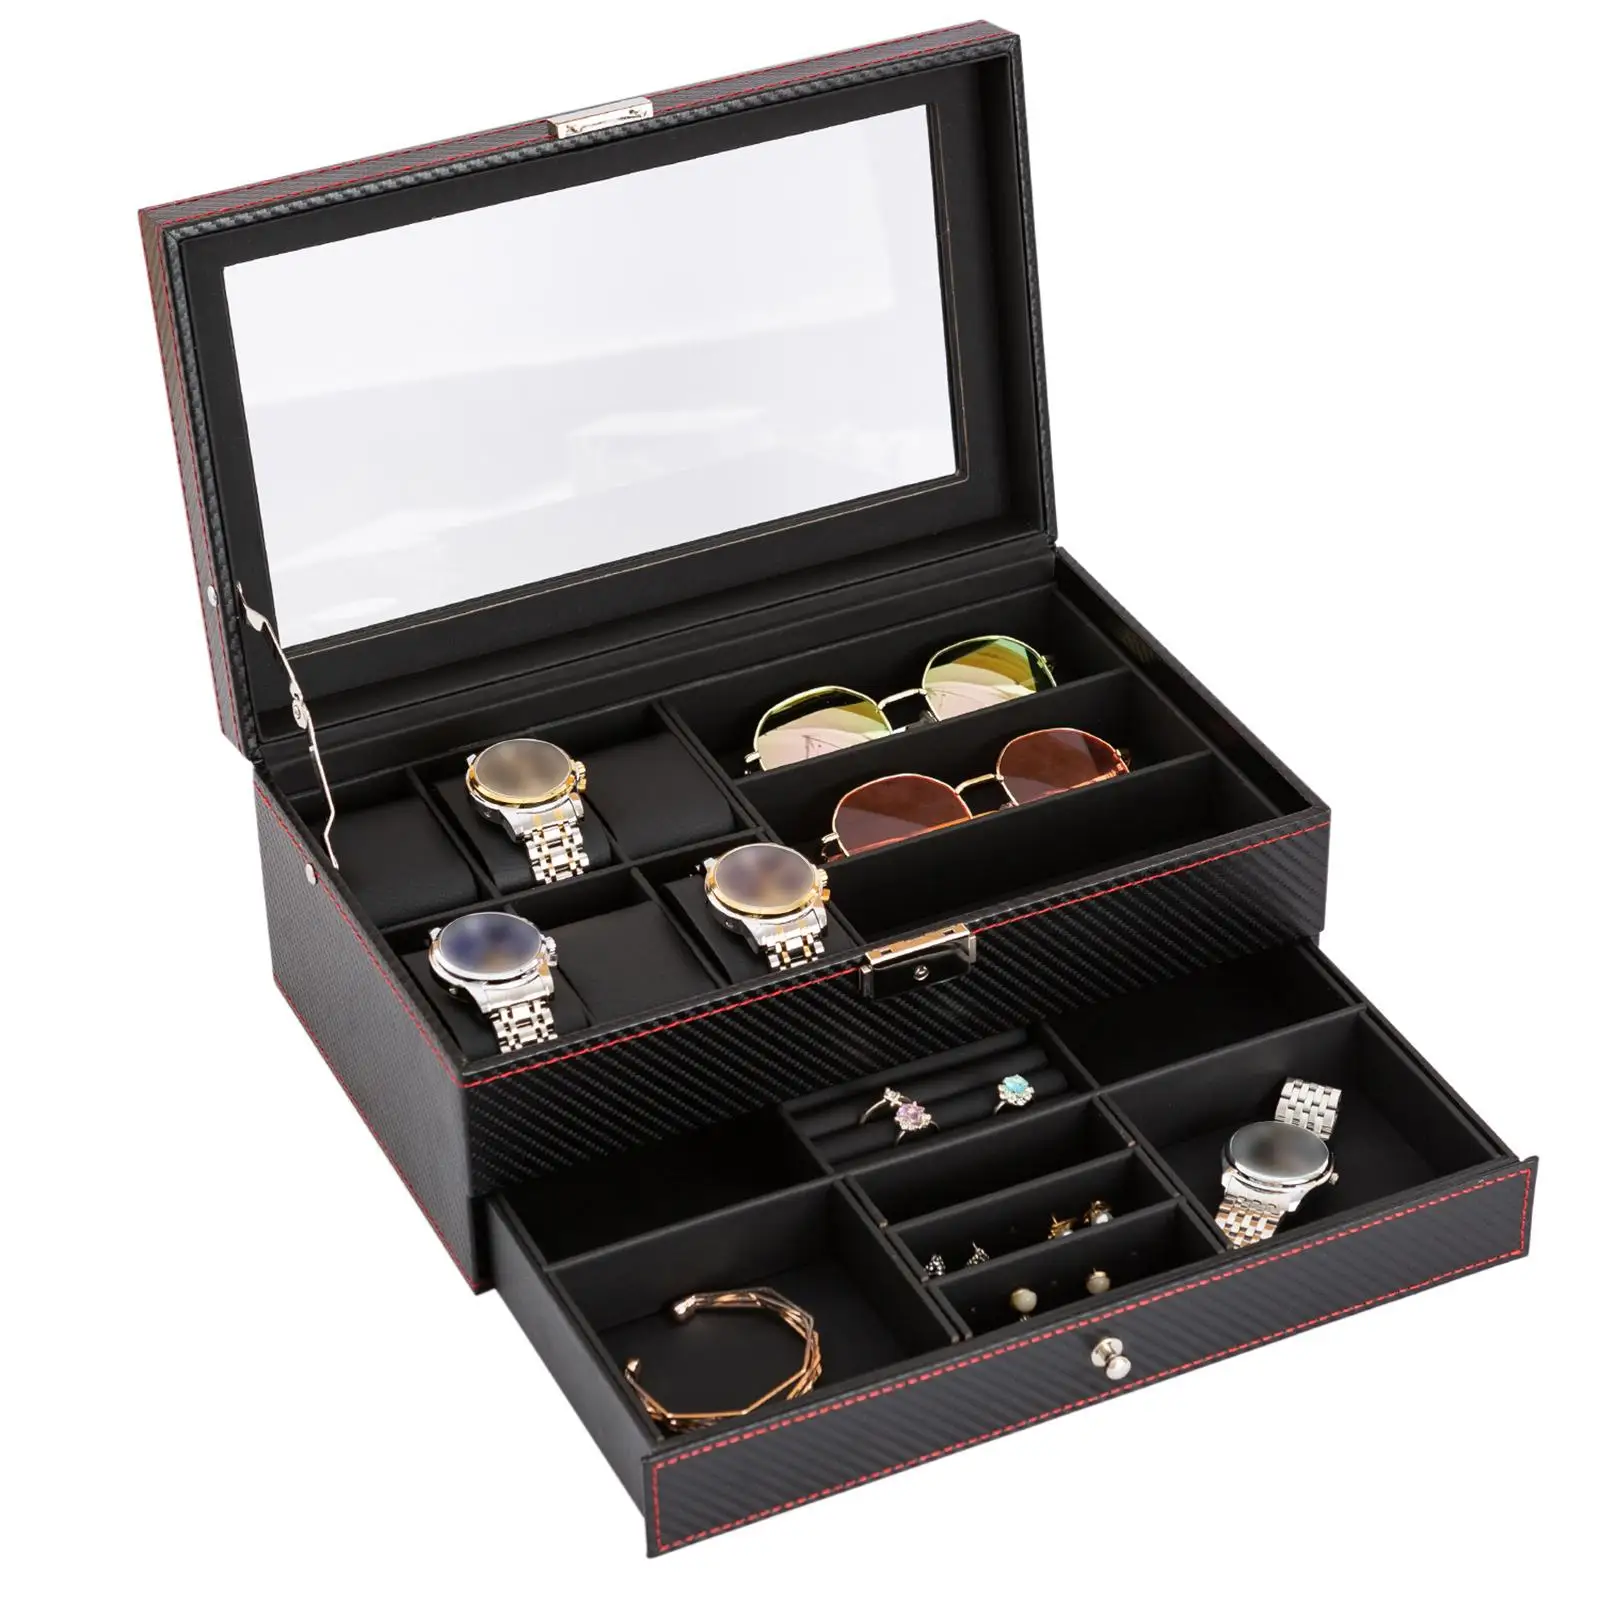 Double Layer Jewelry Display Case PU Leather Multifunctional Portable Watch Storage Box for Earrings Necklace Home Decoration